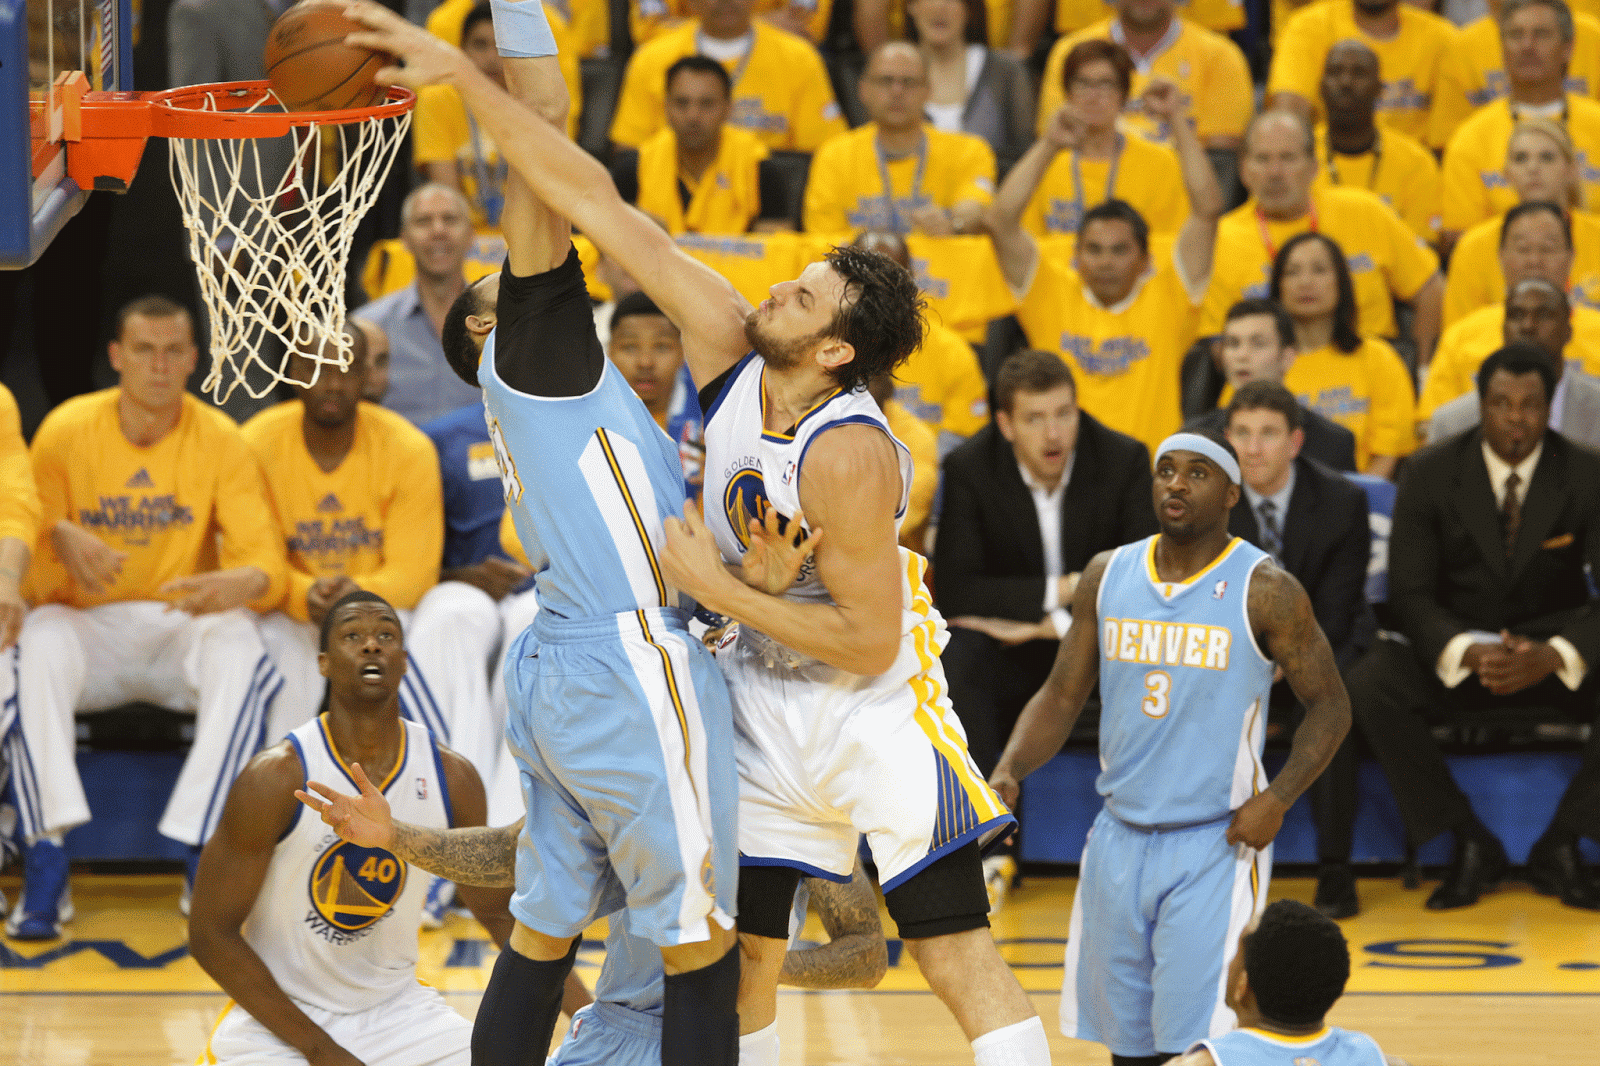 You Got Dunked On: 2013 NBA Playoffs: Andrew Bogut Dunks On JaVale